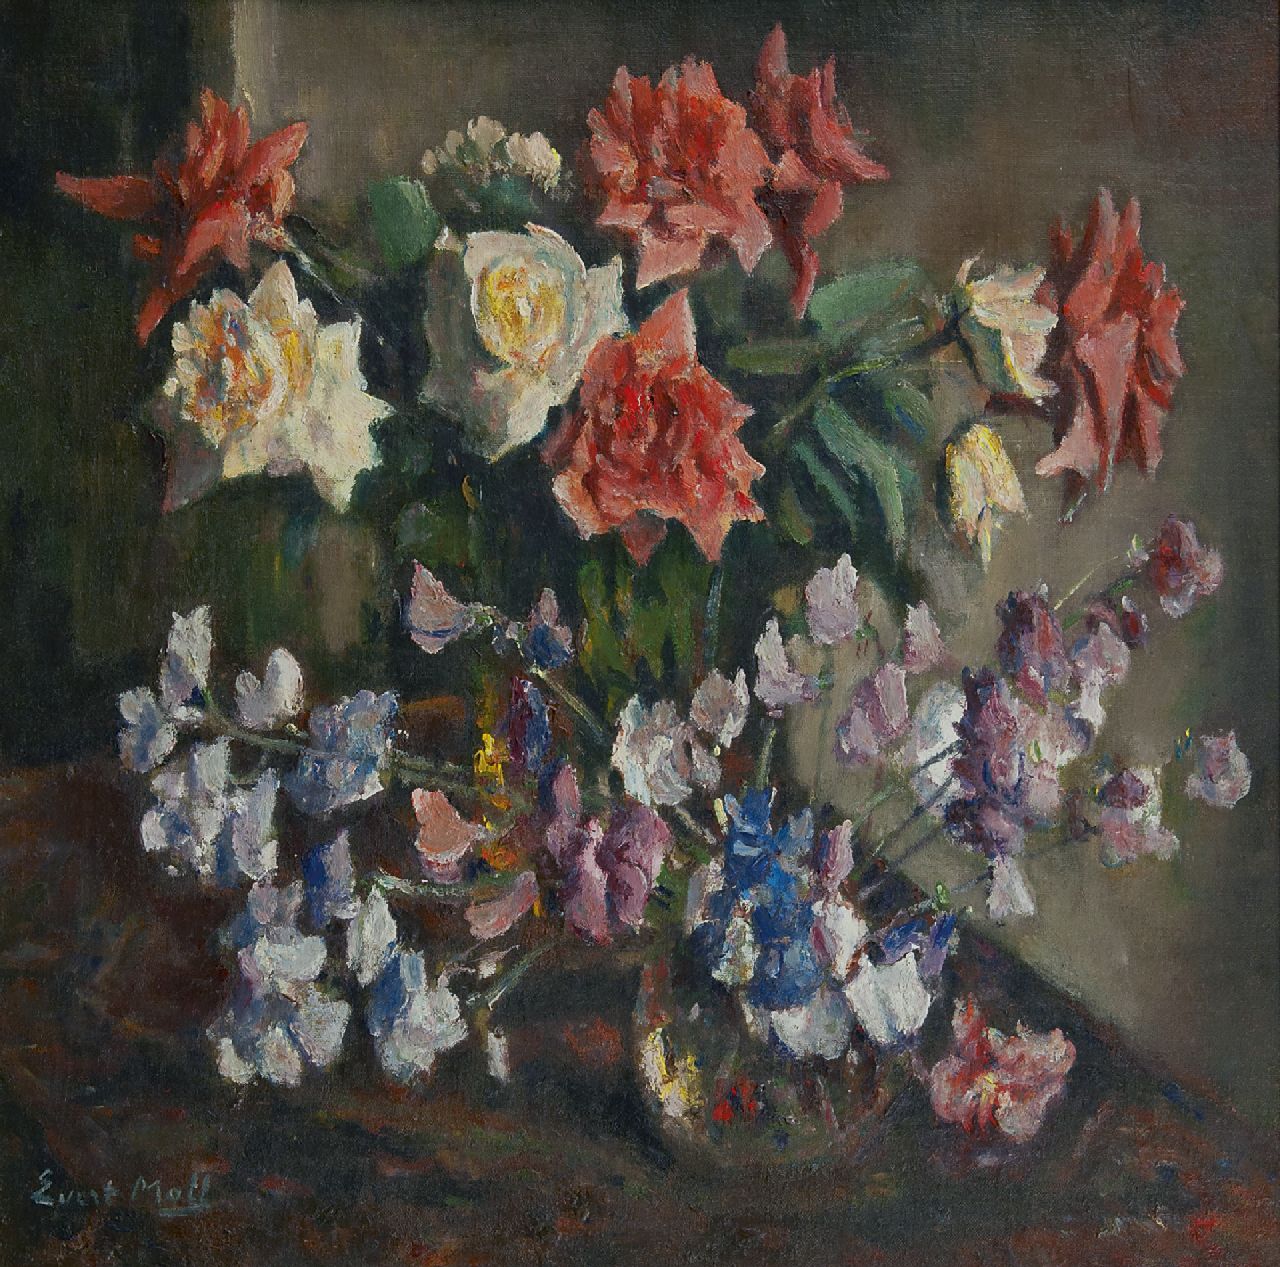 Moll E.  | Evert Moll, A still life with roses, oil on canvas 60.2 x 60.5 cm, signed l.l.